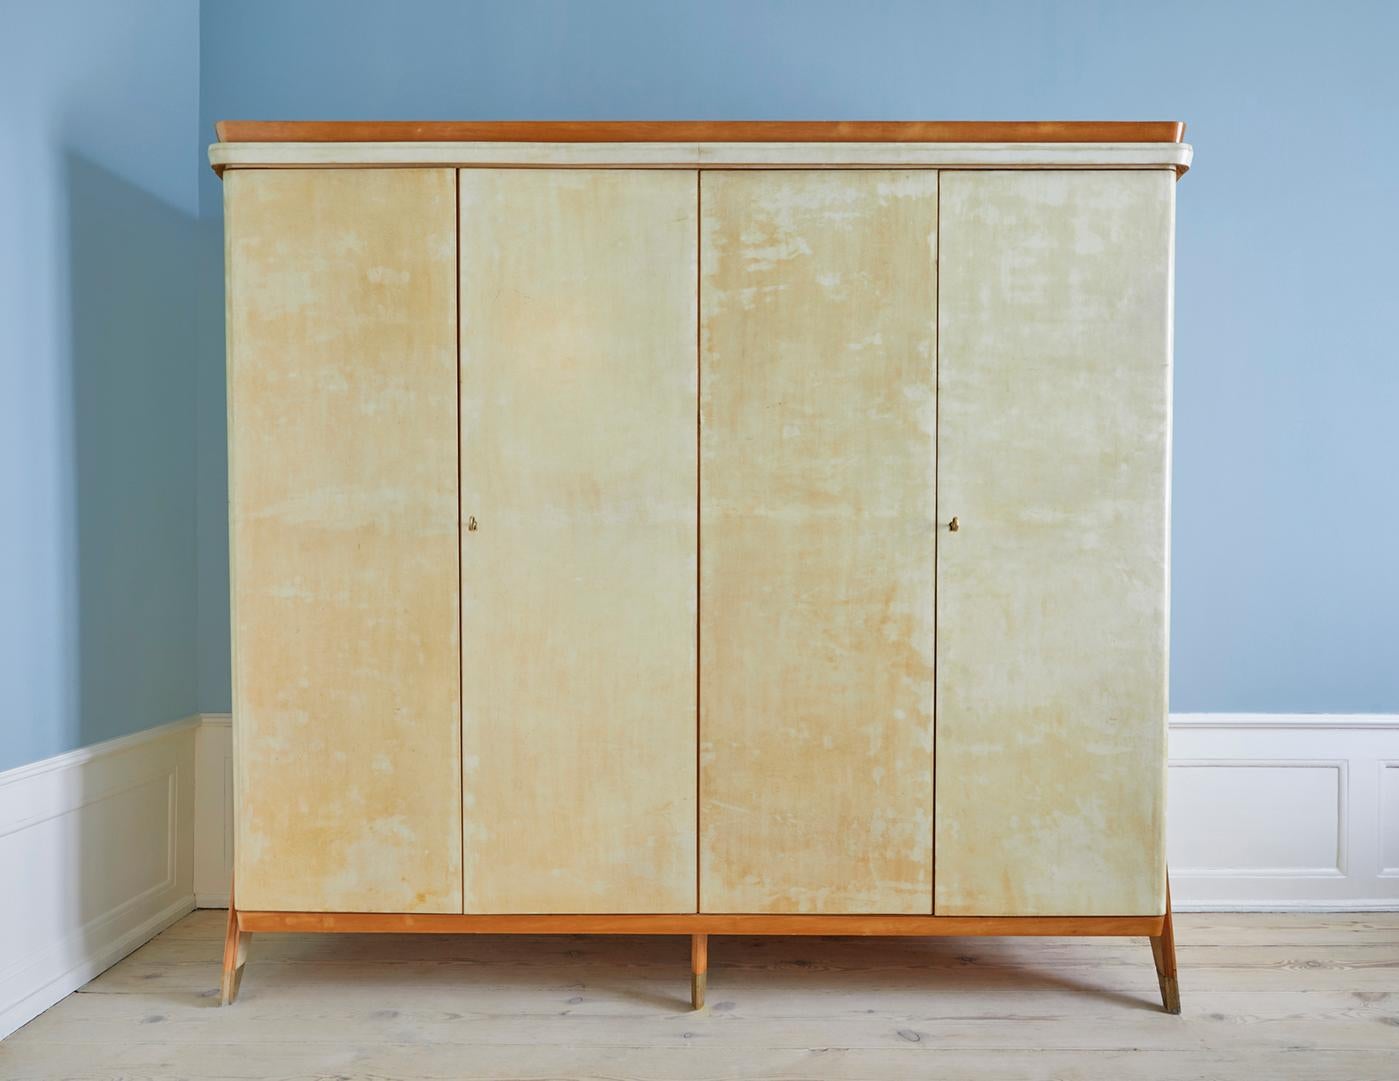 Italy, 1950s

Parchment cabinet with wooden molding and brass shoes. Detailed wooden interior.

Measures: H 190 x W 204 x D 64 cm.